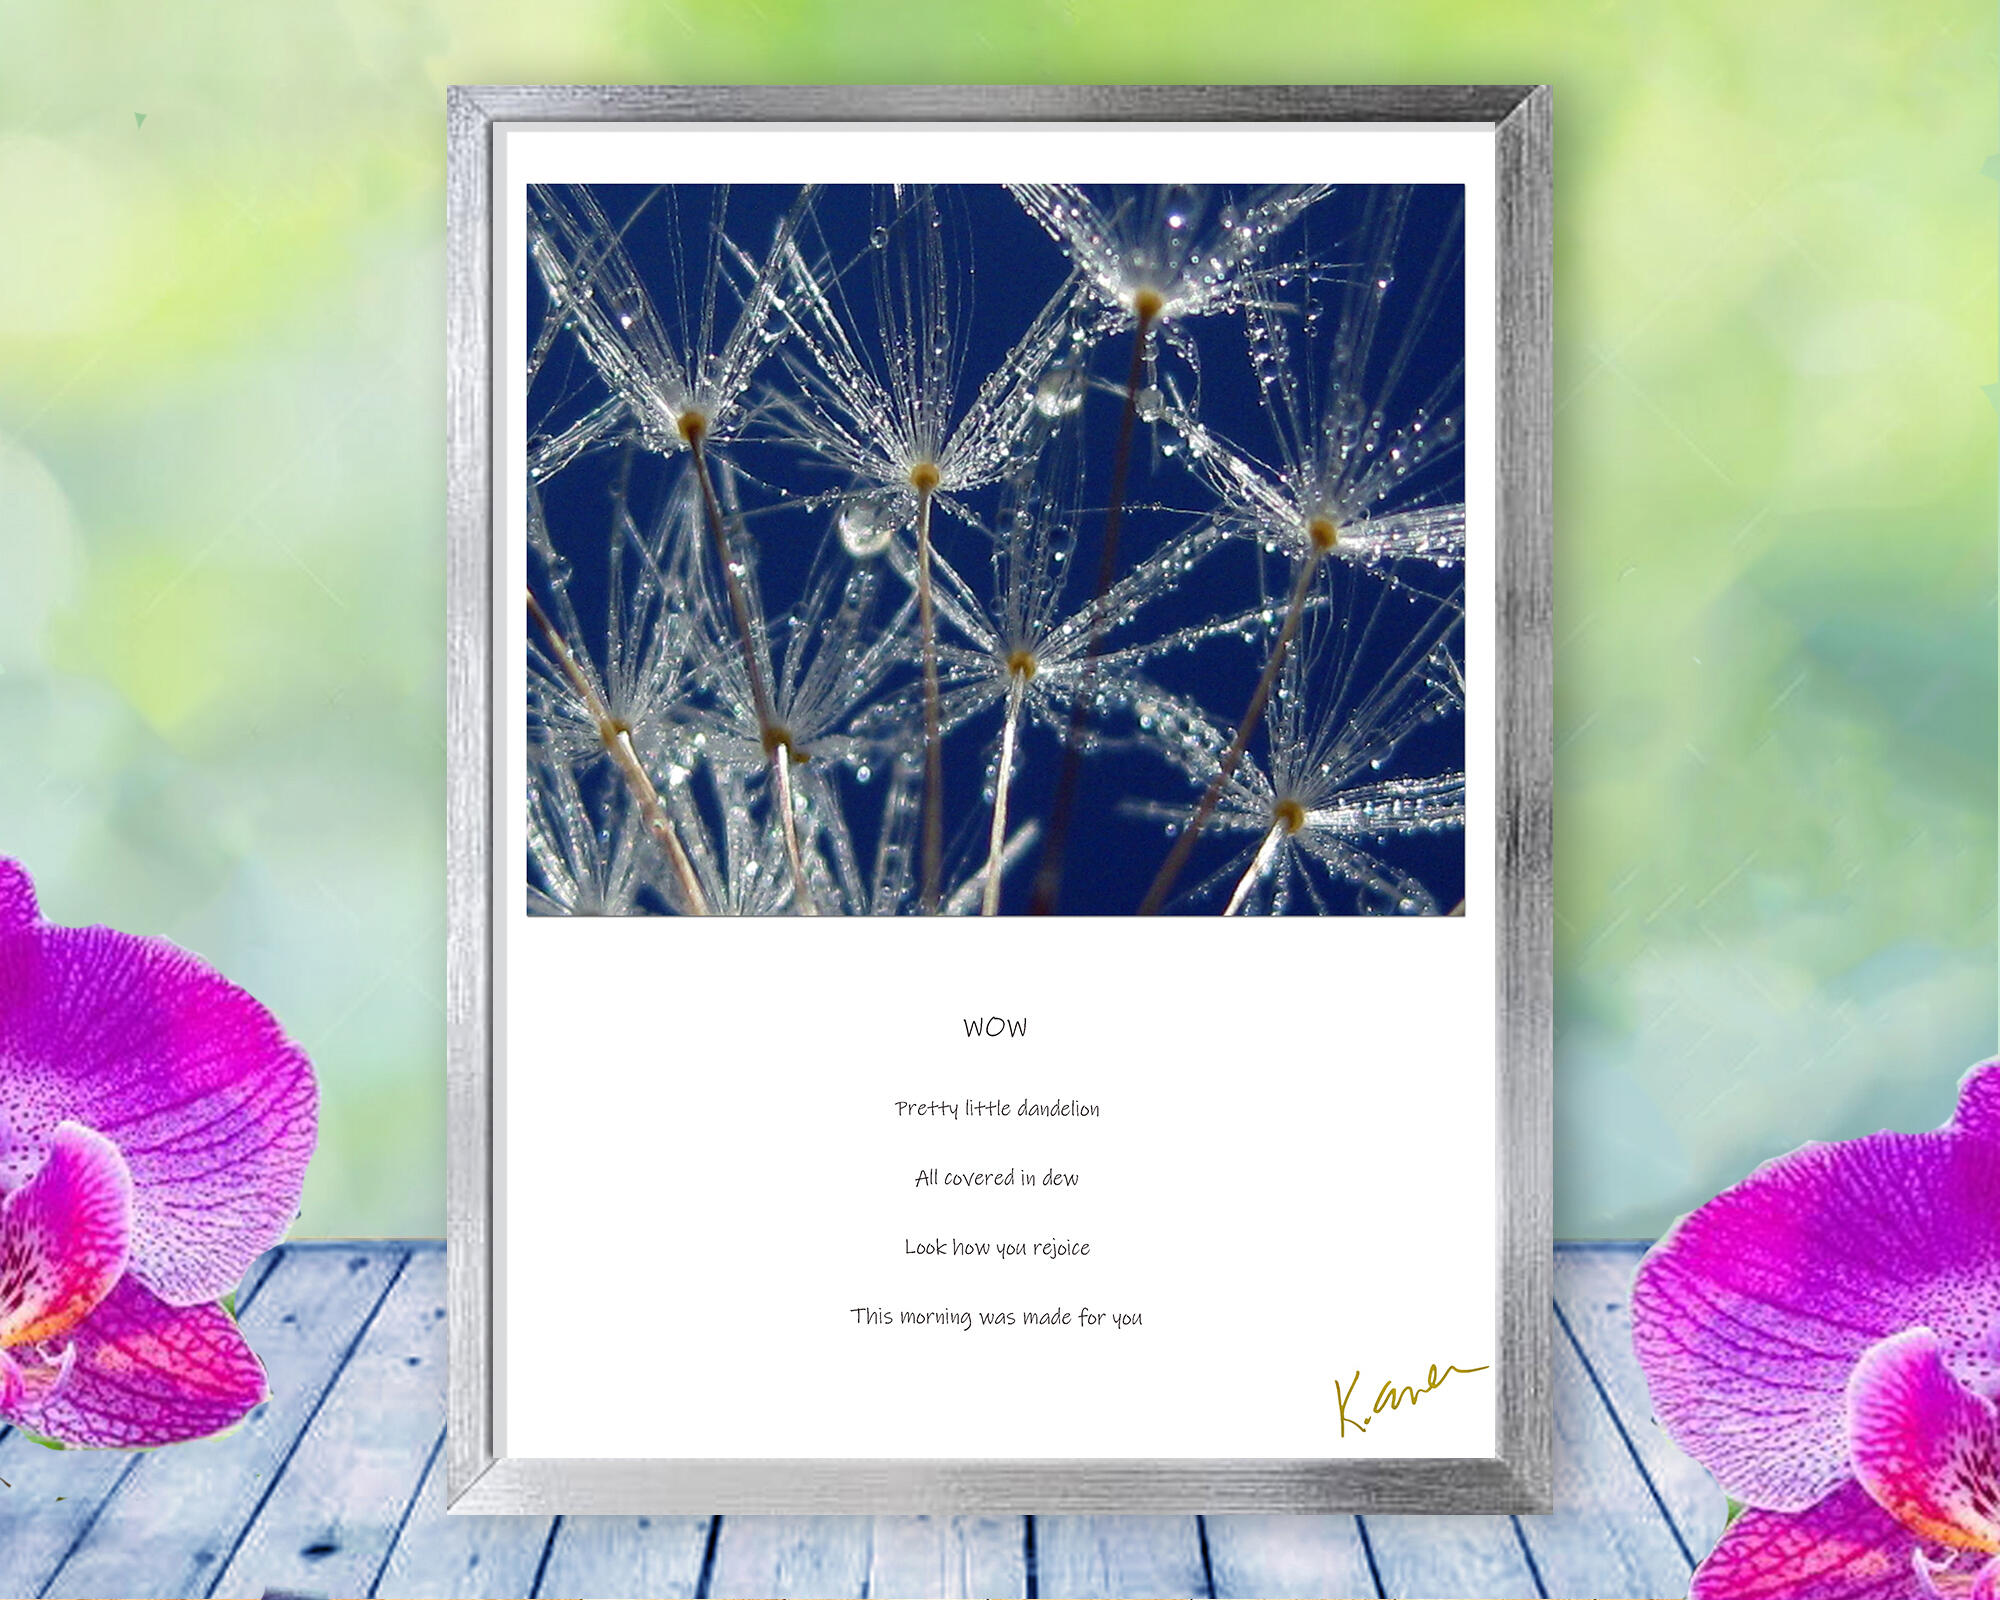 A dew covered dandelion rejoices in the summer sun in this happy, joyful, sentient nature print with poem -Wow by The Poetry of Nature